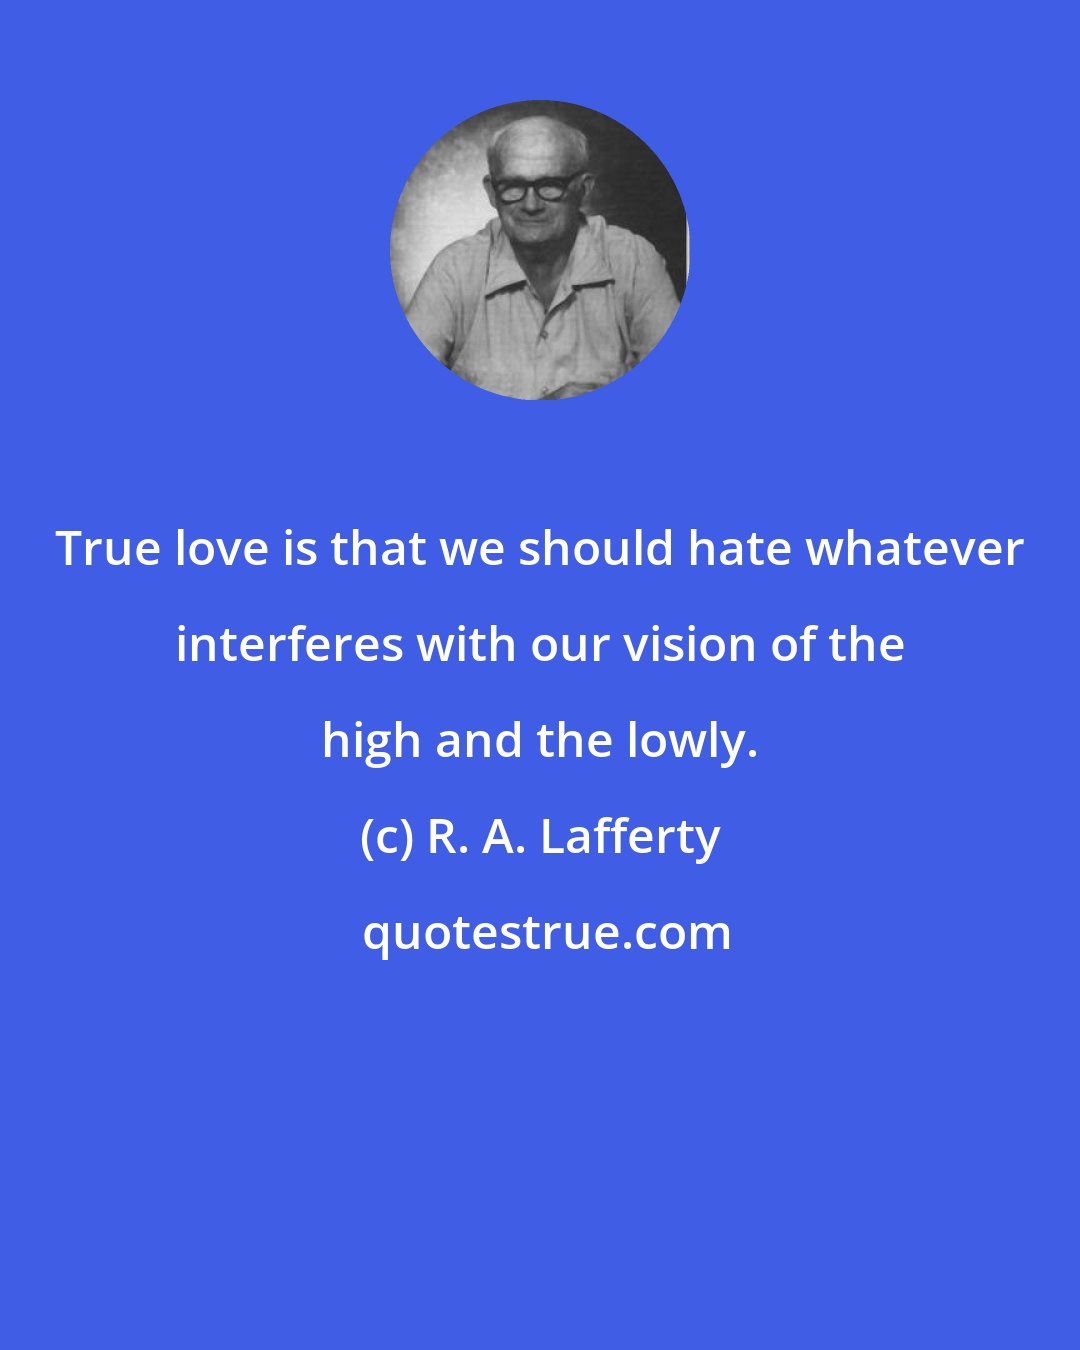 R. A. Lafferty: True love is that we should hate whatever interferes with our vision of the high and the lowly.